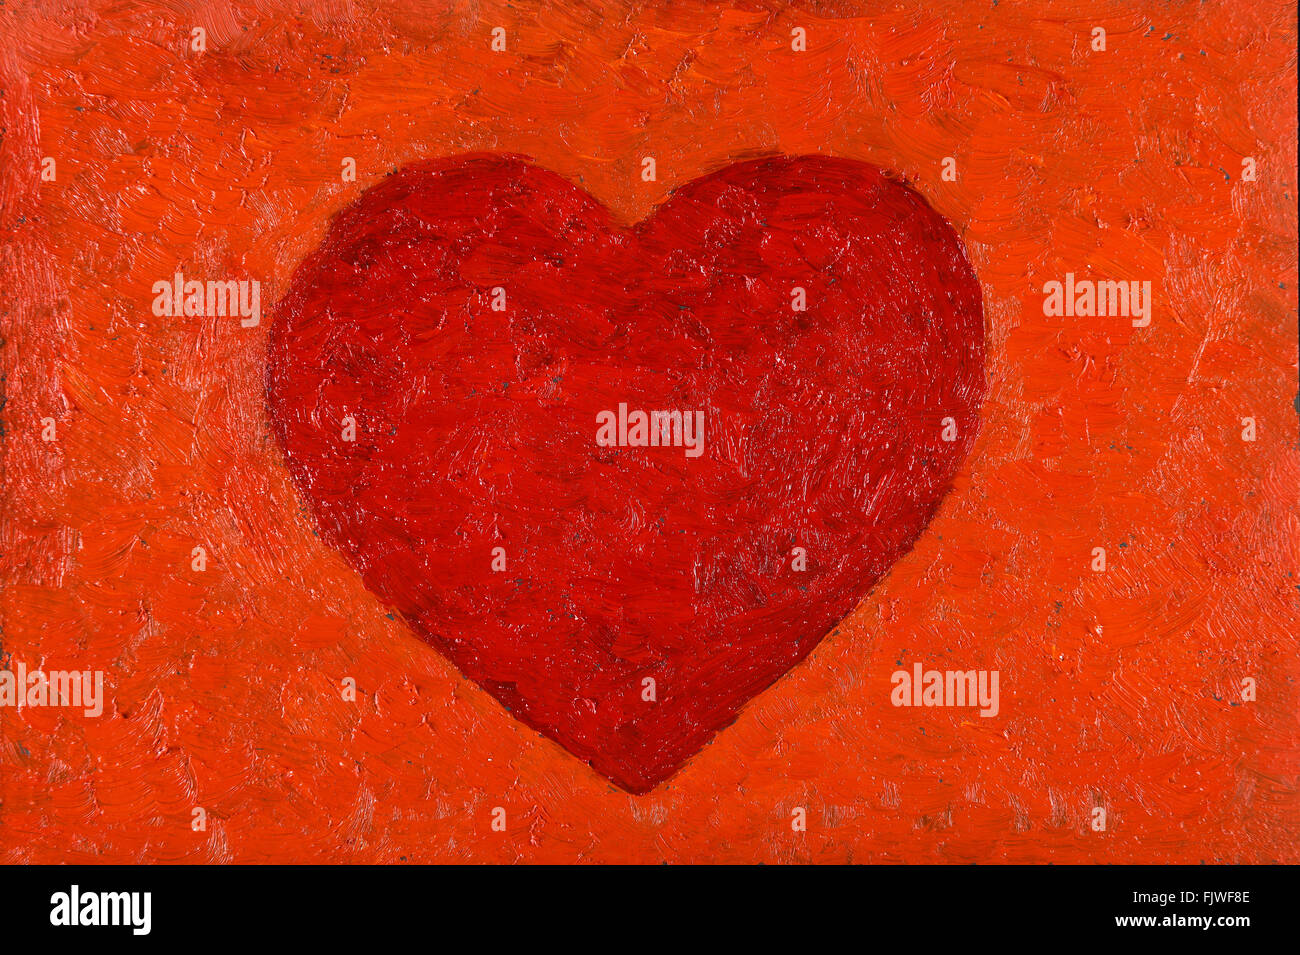 Oil painting of red heart over orange background Stock Photo